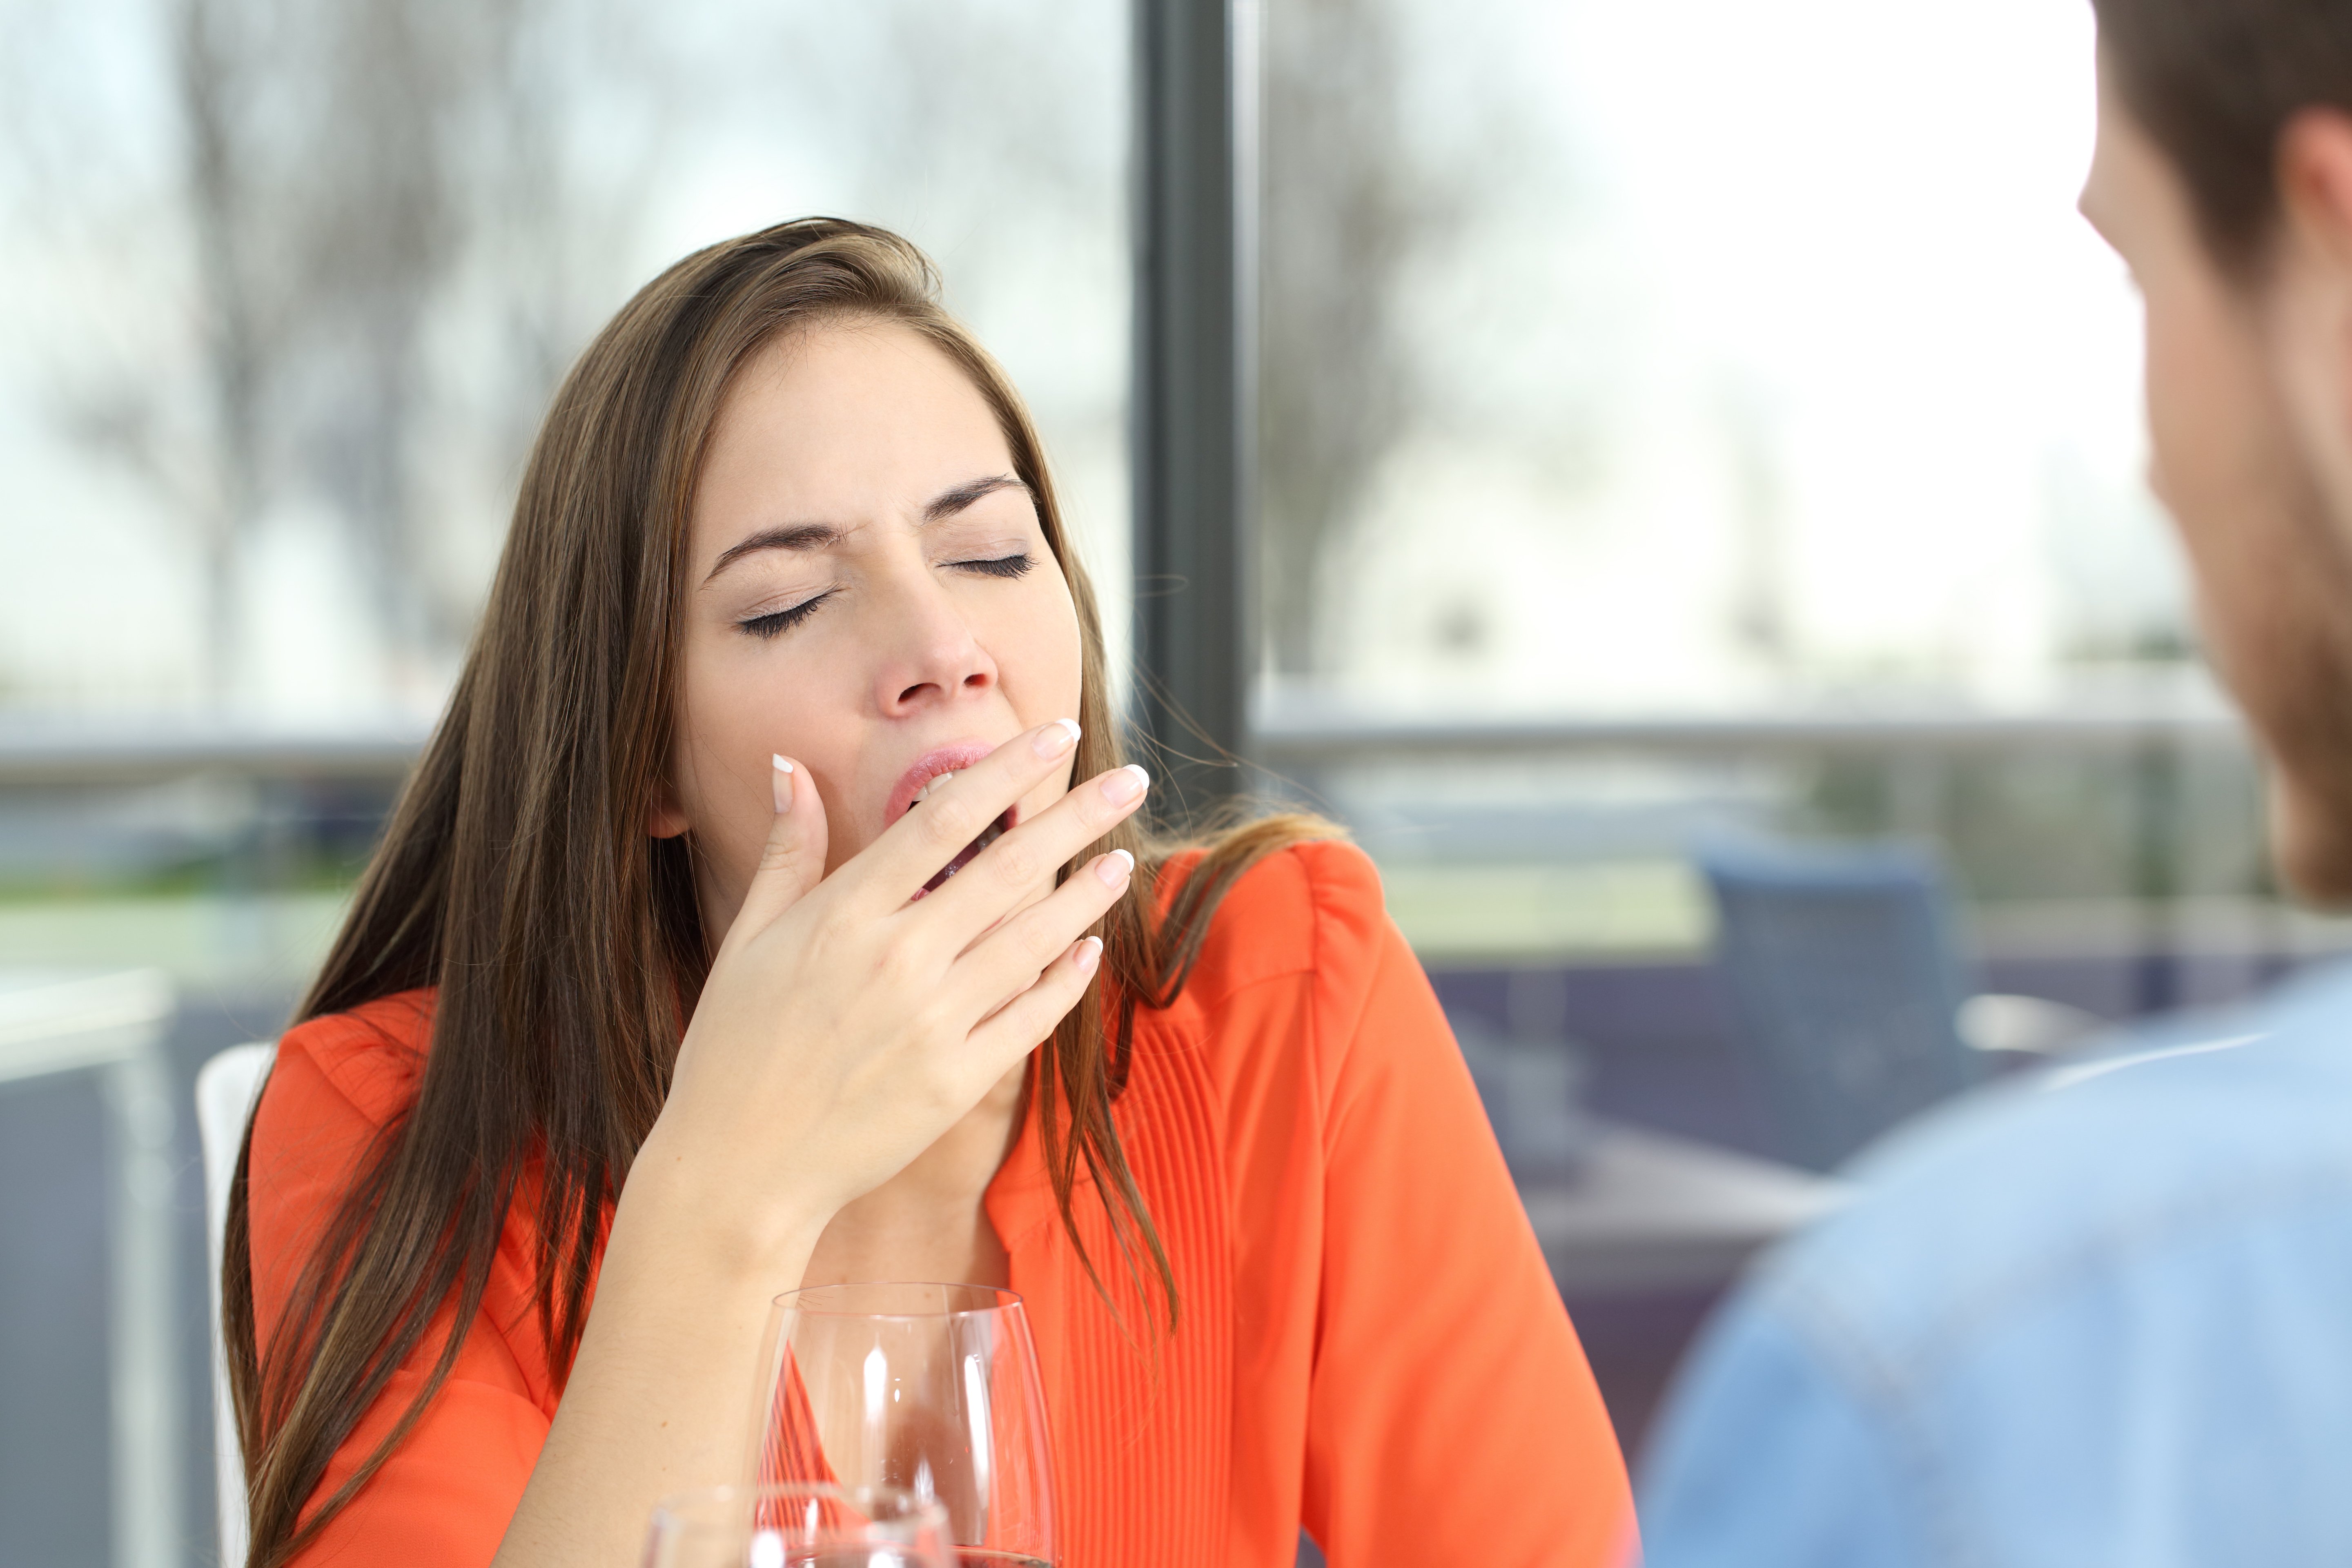 Photo of woman yawning while sitting at a table with a man. | Source: Shutterstock